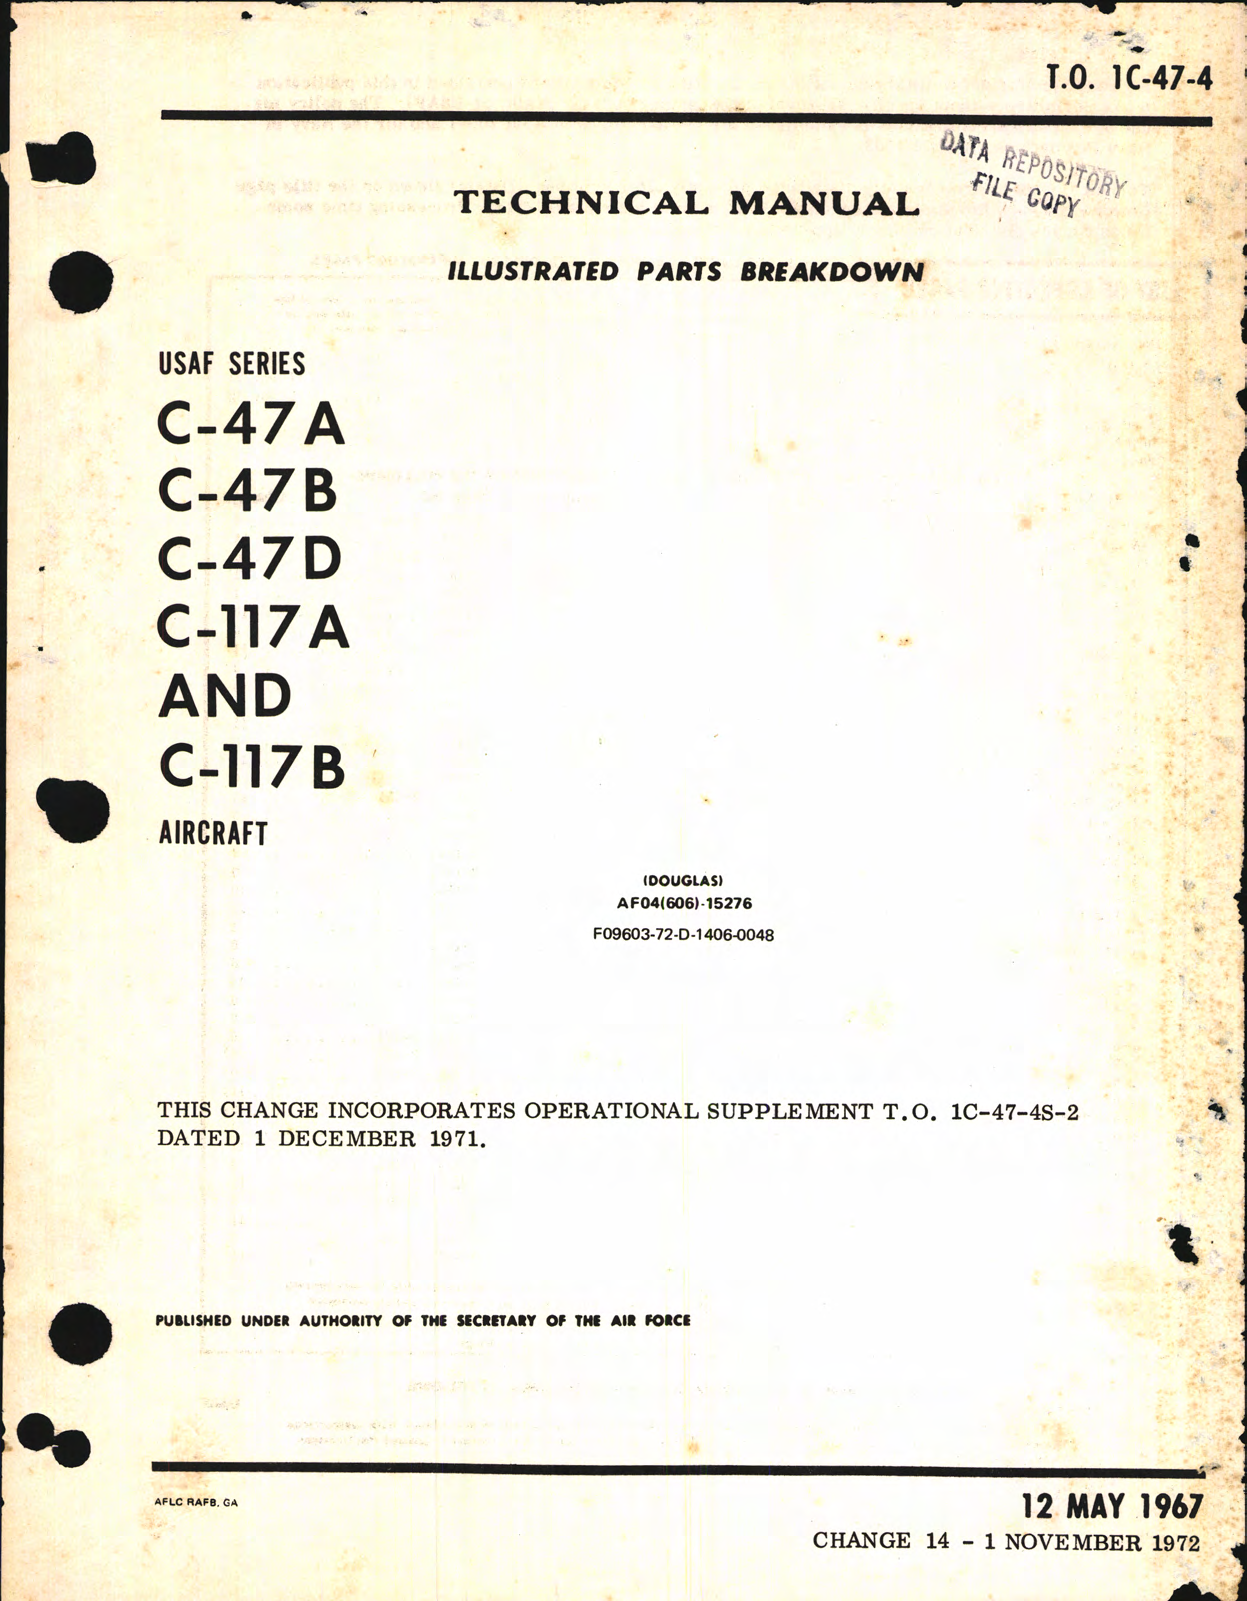 Sample page 5 from AirCorps Library document: Illustrated Parts Breakdown for C-47A, B, D, AC-47, EC-47, RC-47, C-117A and B